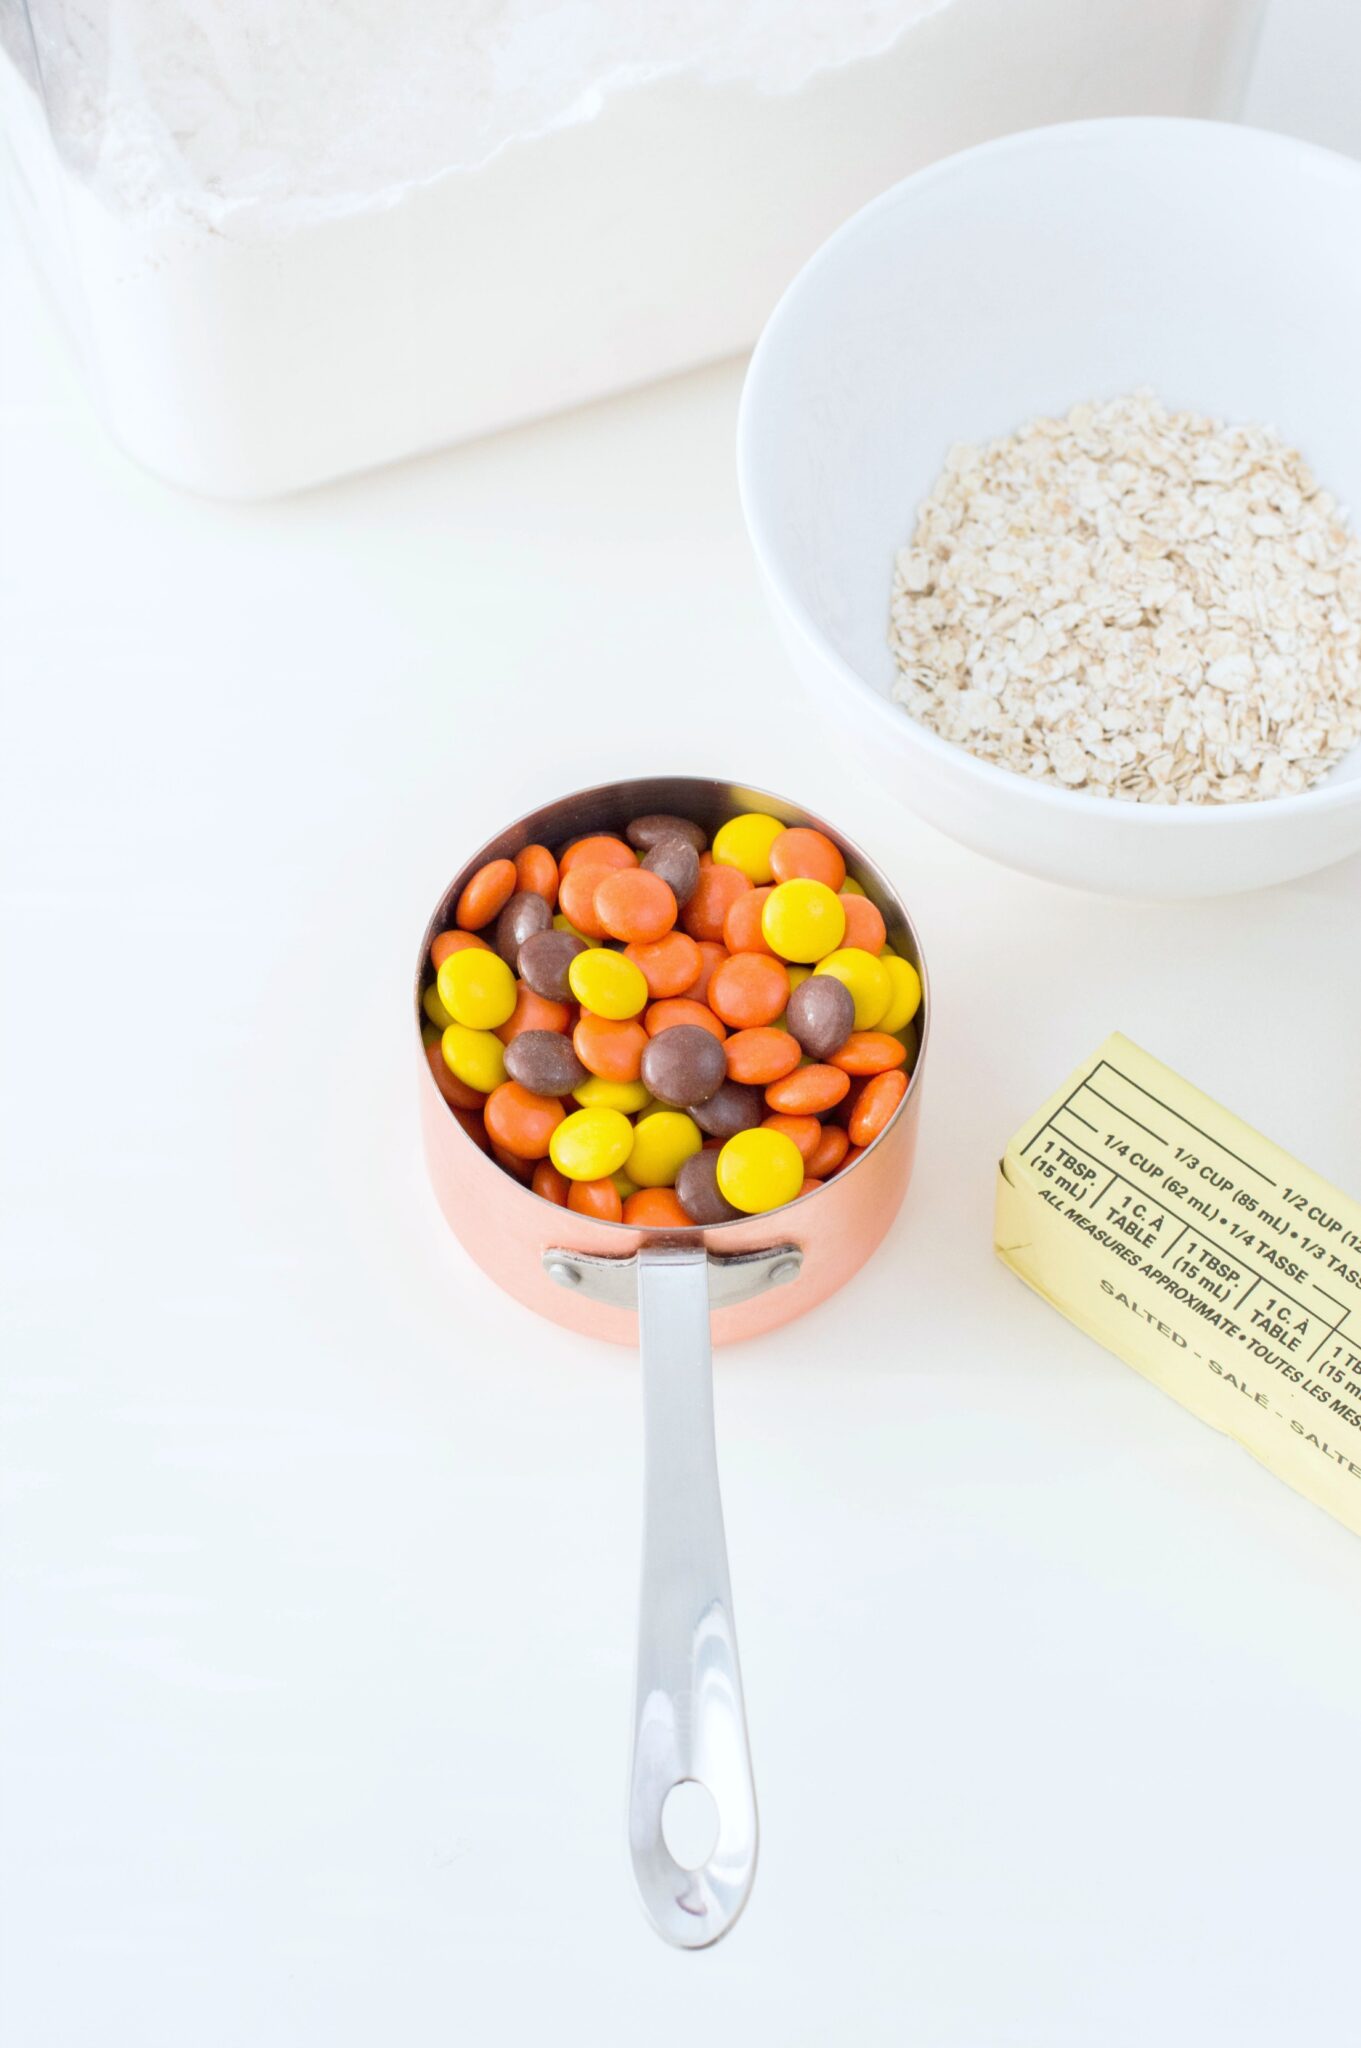 A cup of Reese's Pieces is shown with other ingredients. 